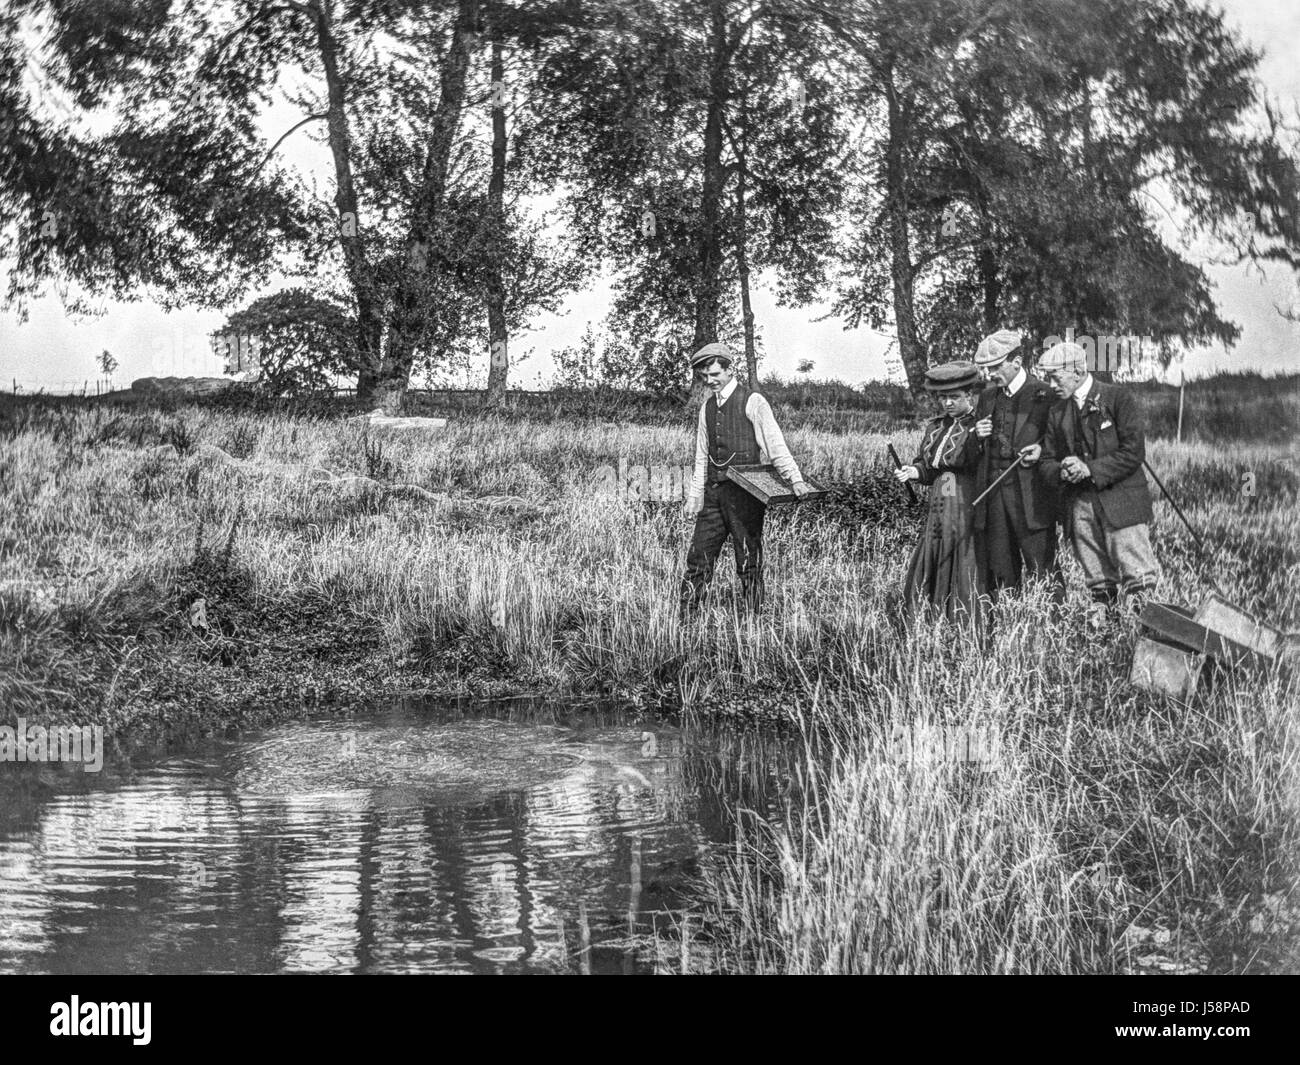 Watched by two men and a lady a young man holding a tray feeds fish in a small pond in 1910. The older men and the lady are all carrying walking sticks, on the ground in front of them are some empty feed trays. Restored using a high resolution scan taken from the original negative. Stock Photo